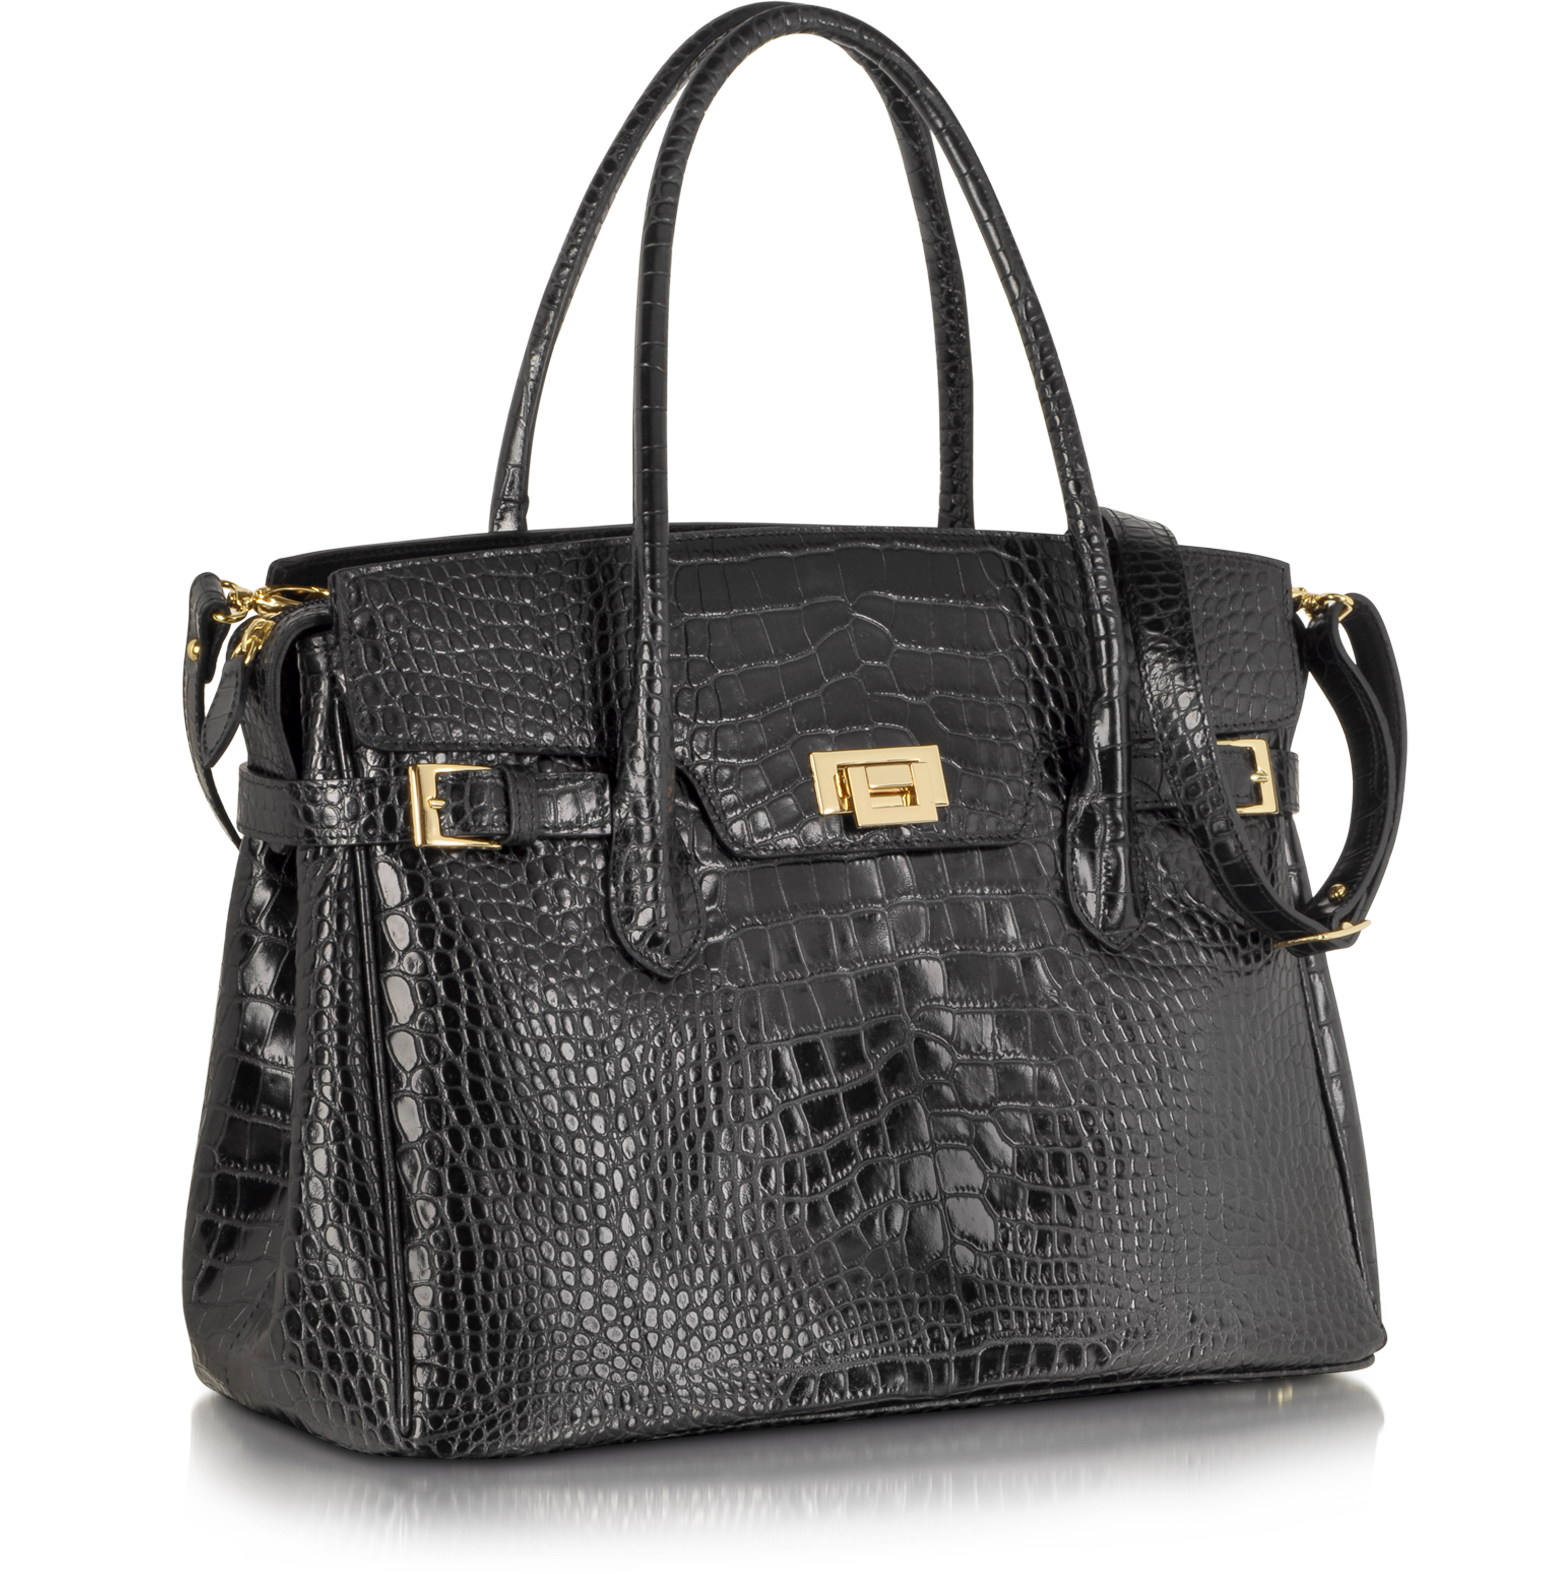 Fontanelli Shiny Black Croco Embossed Leather Tote at FORZIERI